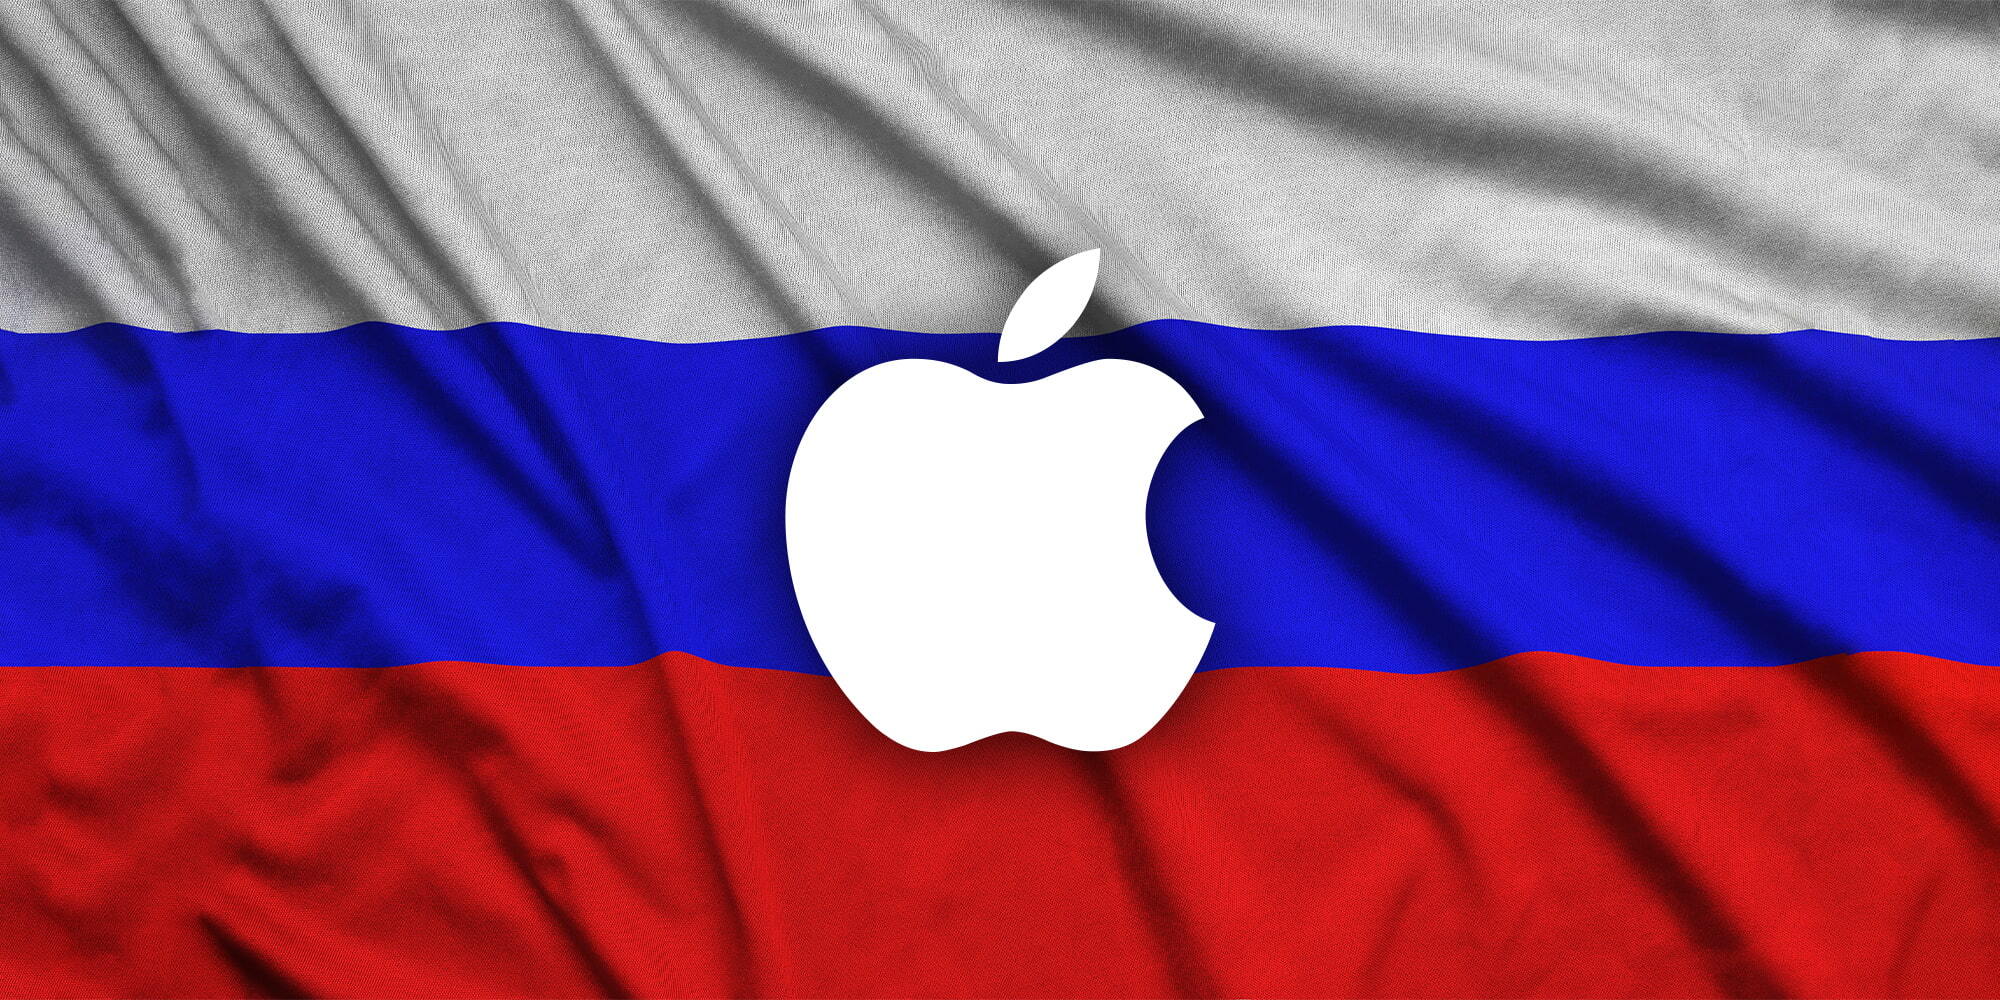 Russia demands Apple and other tech companies open local offices - 9to5Mac